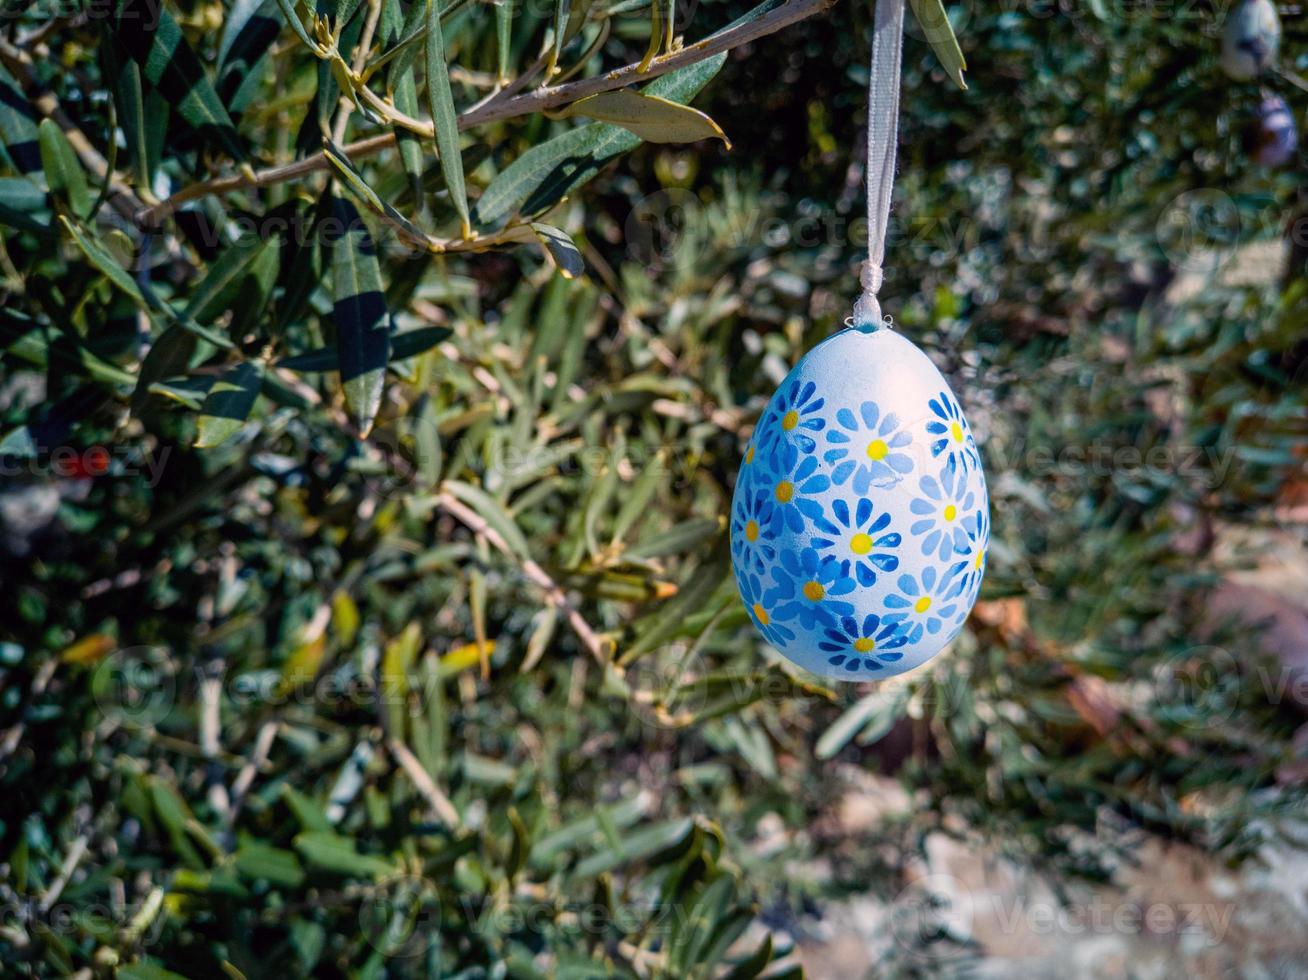 Easter Eggs on the trees. Traditional bulgarian national decoration for Easter. photo